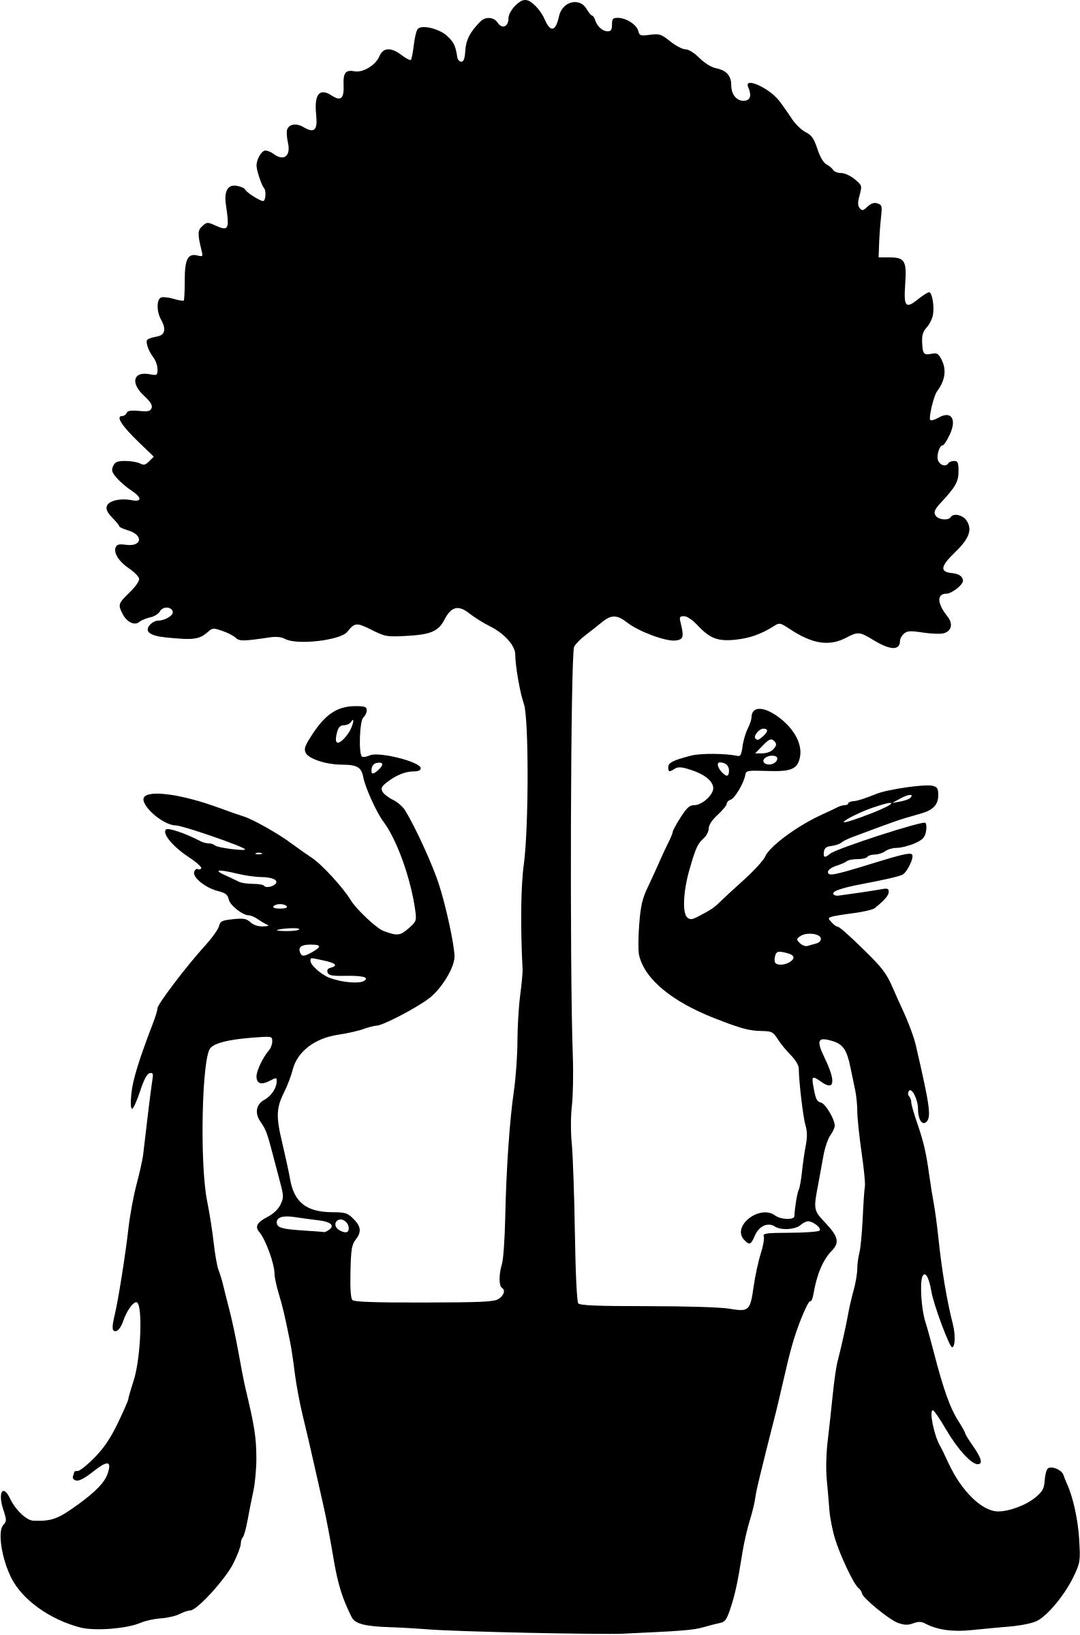 Tree and pheasants silhouette png transparent